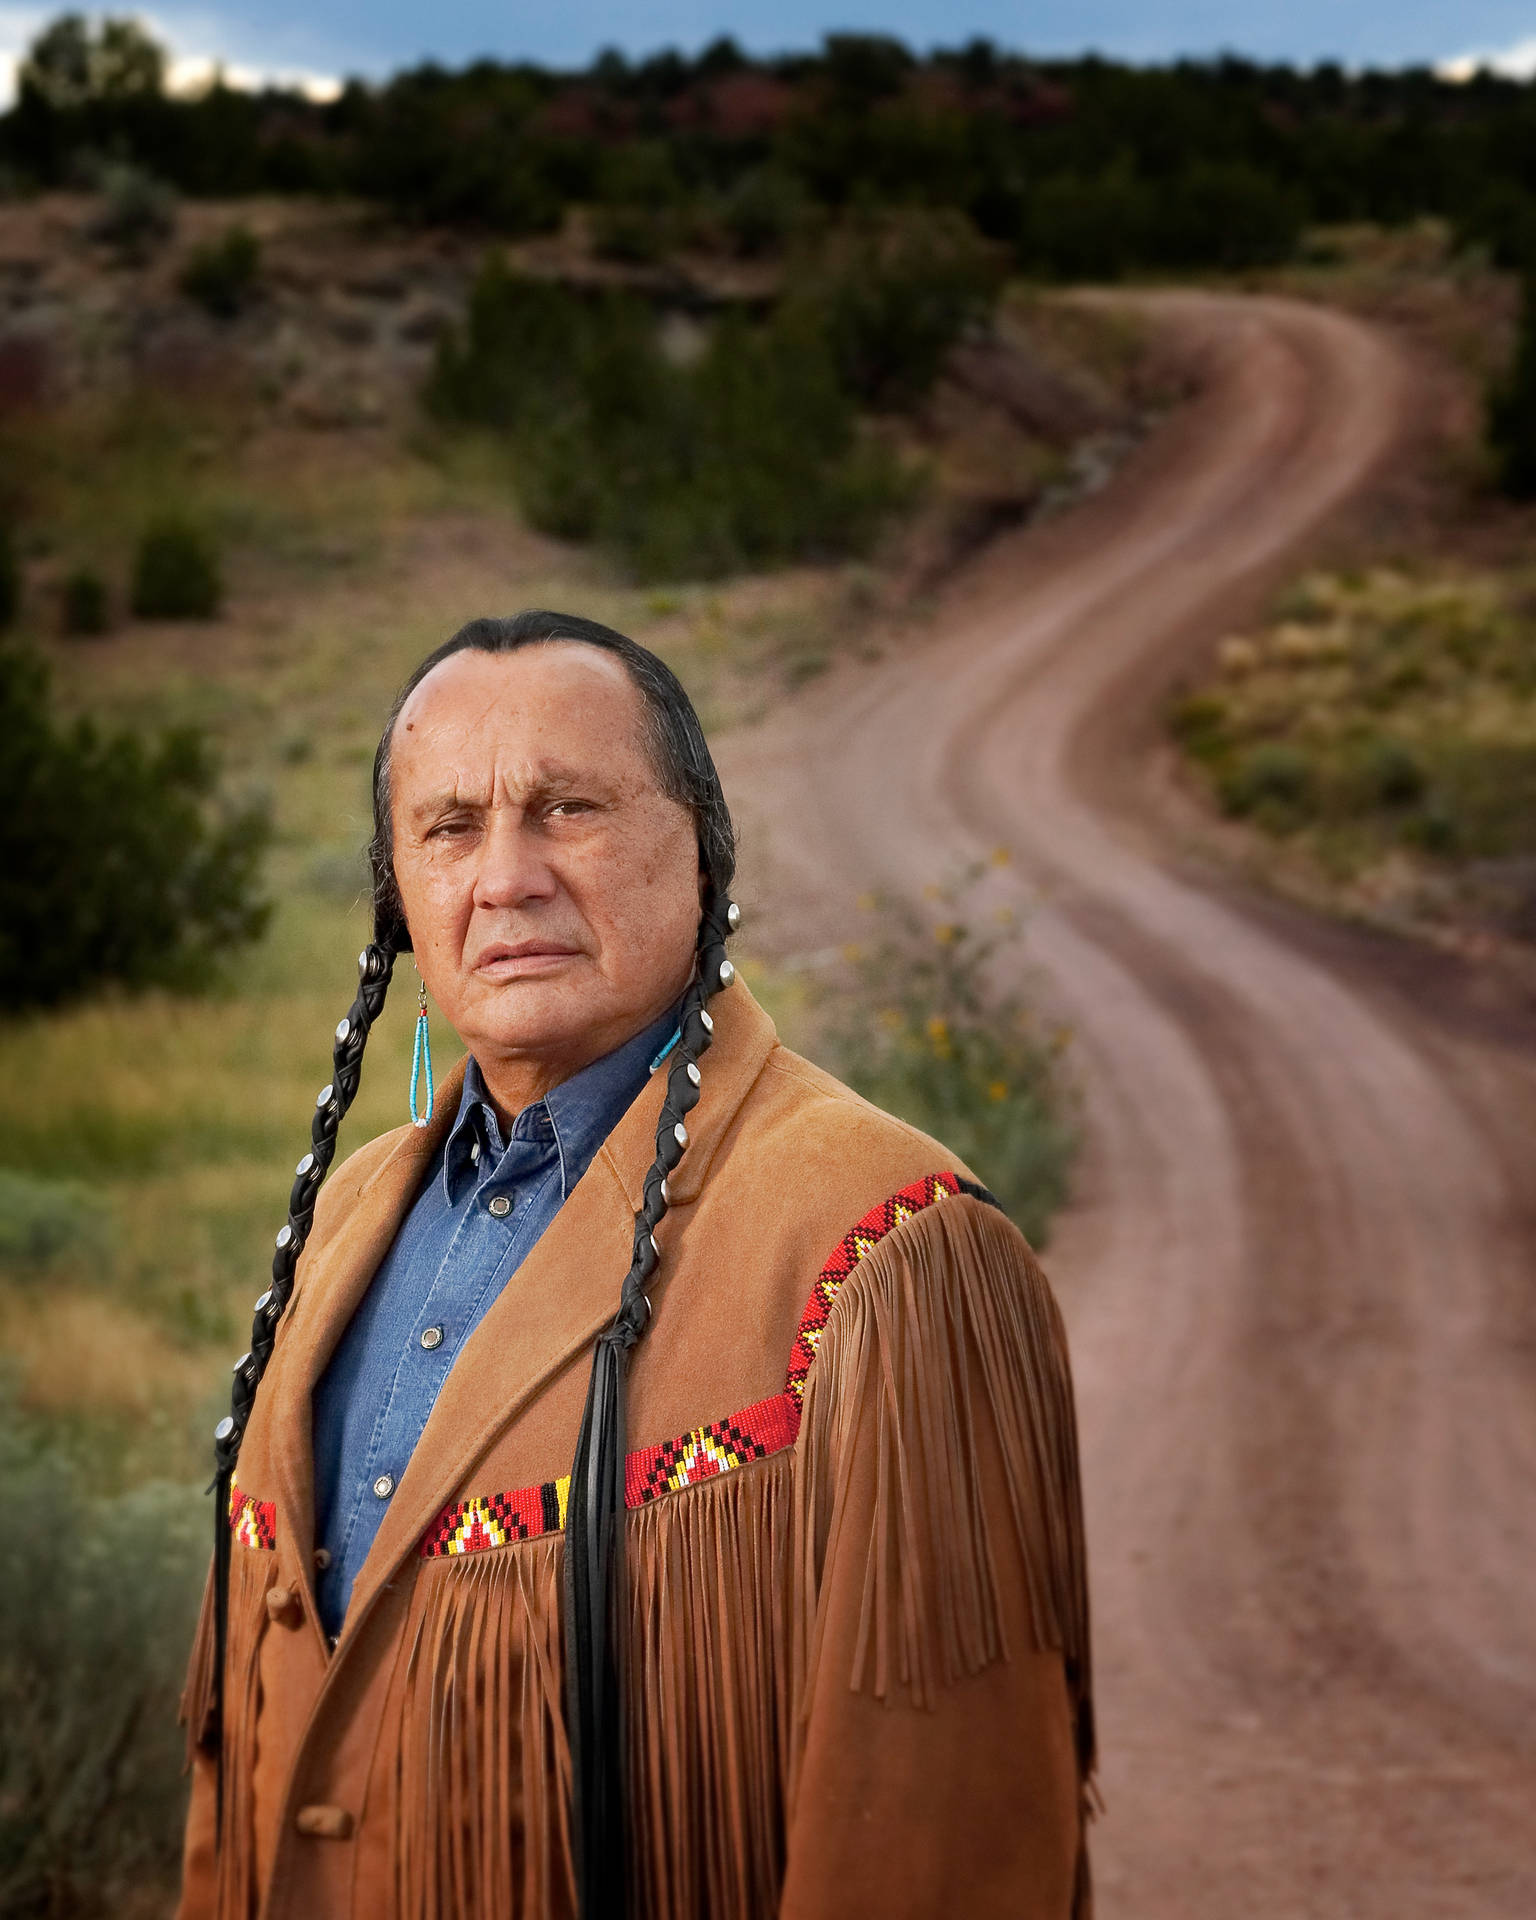 Russell Means Wallpaper